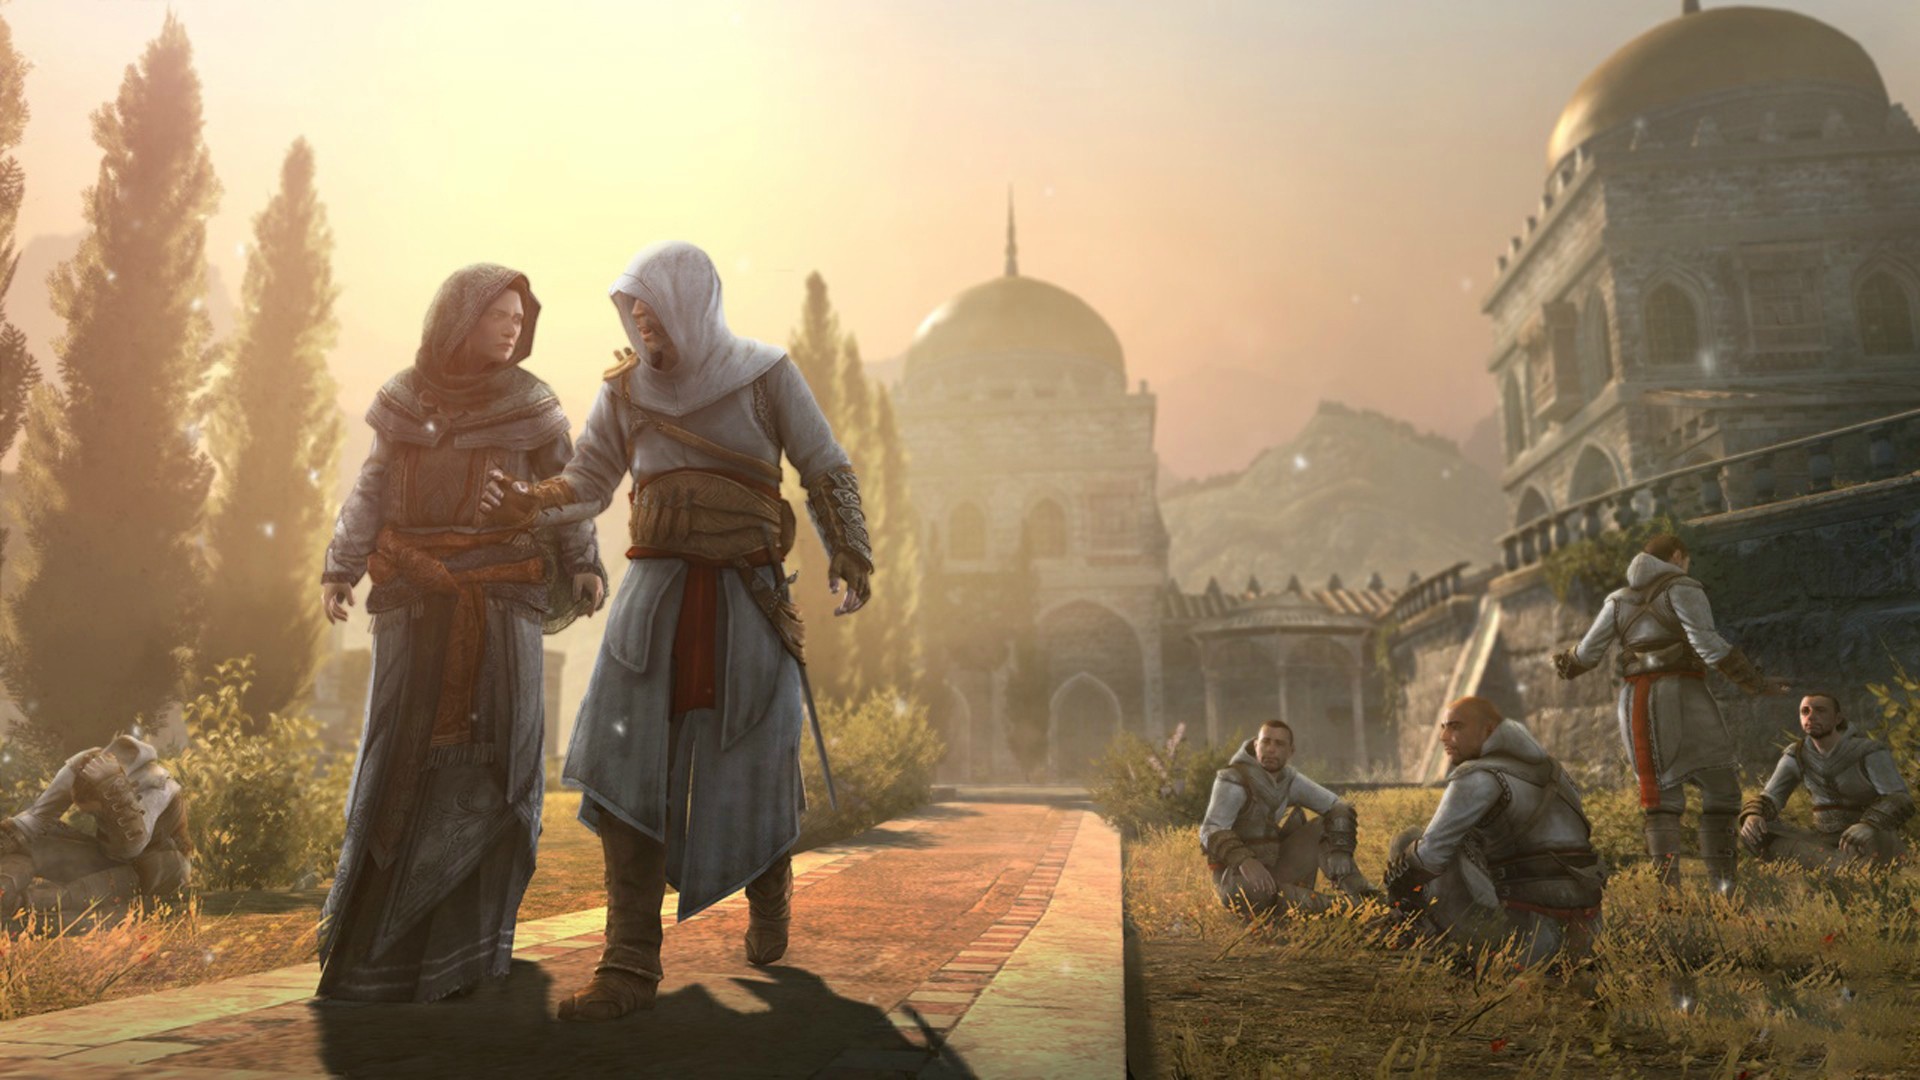 Video Game Assassins Creed Revelations 1920x1080